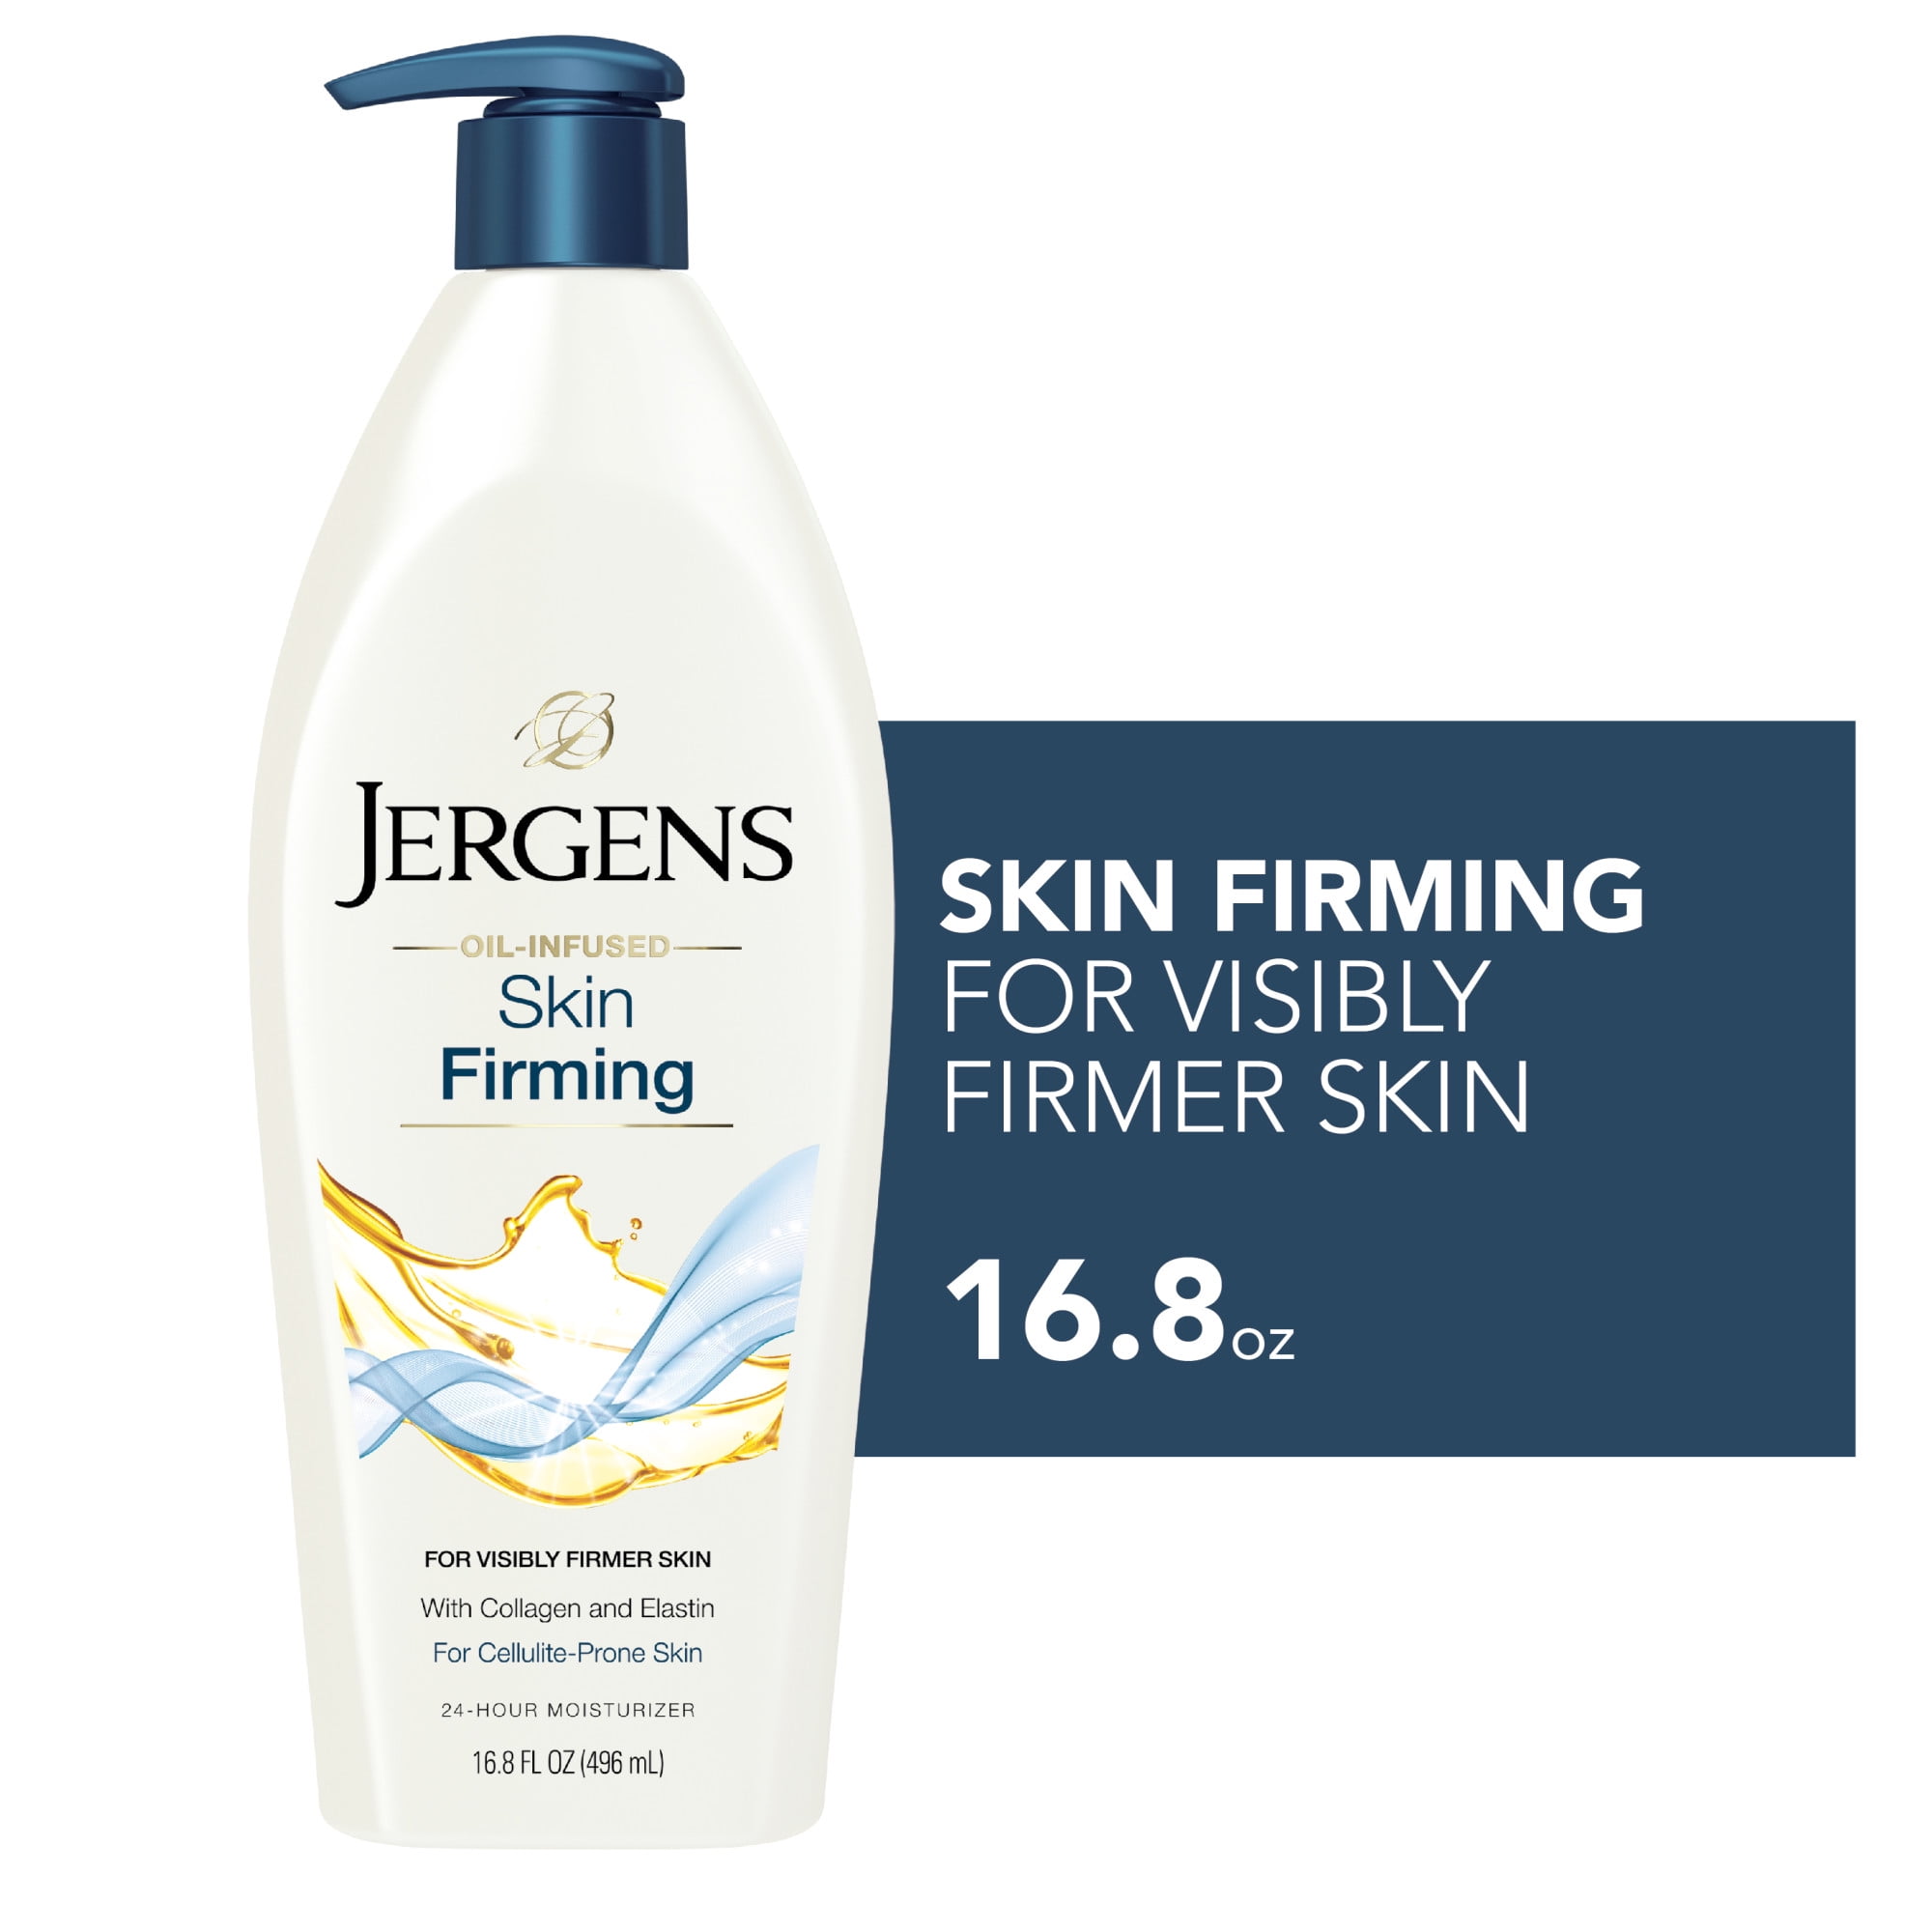 Jergens Oil-Infused Skin Firming 24-Hour Body Lotion, 16.8 fl oz